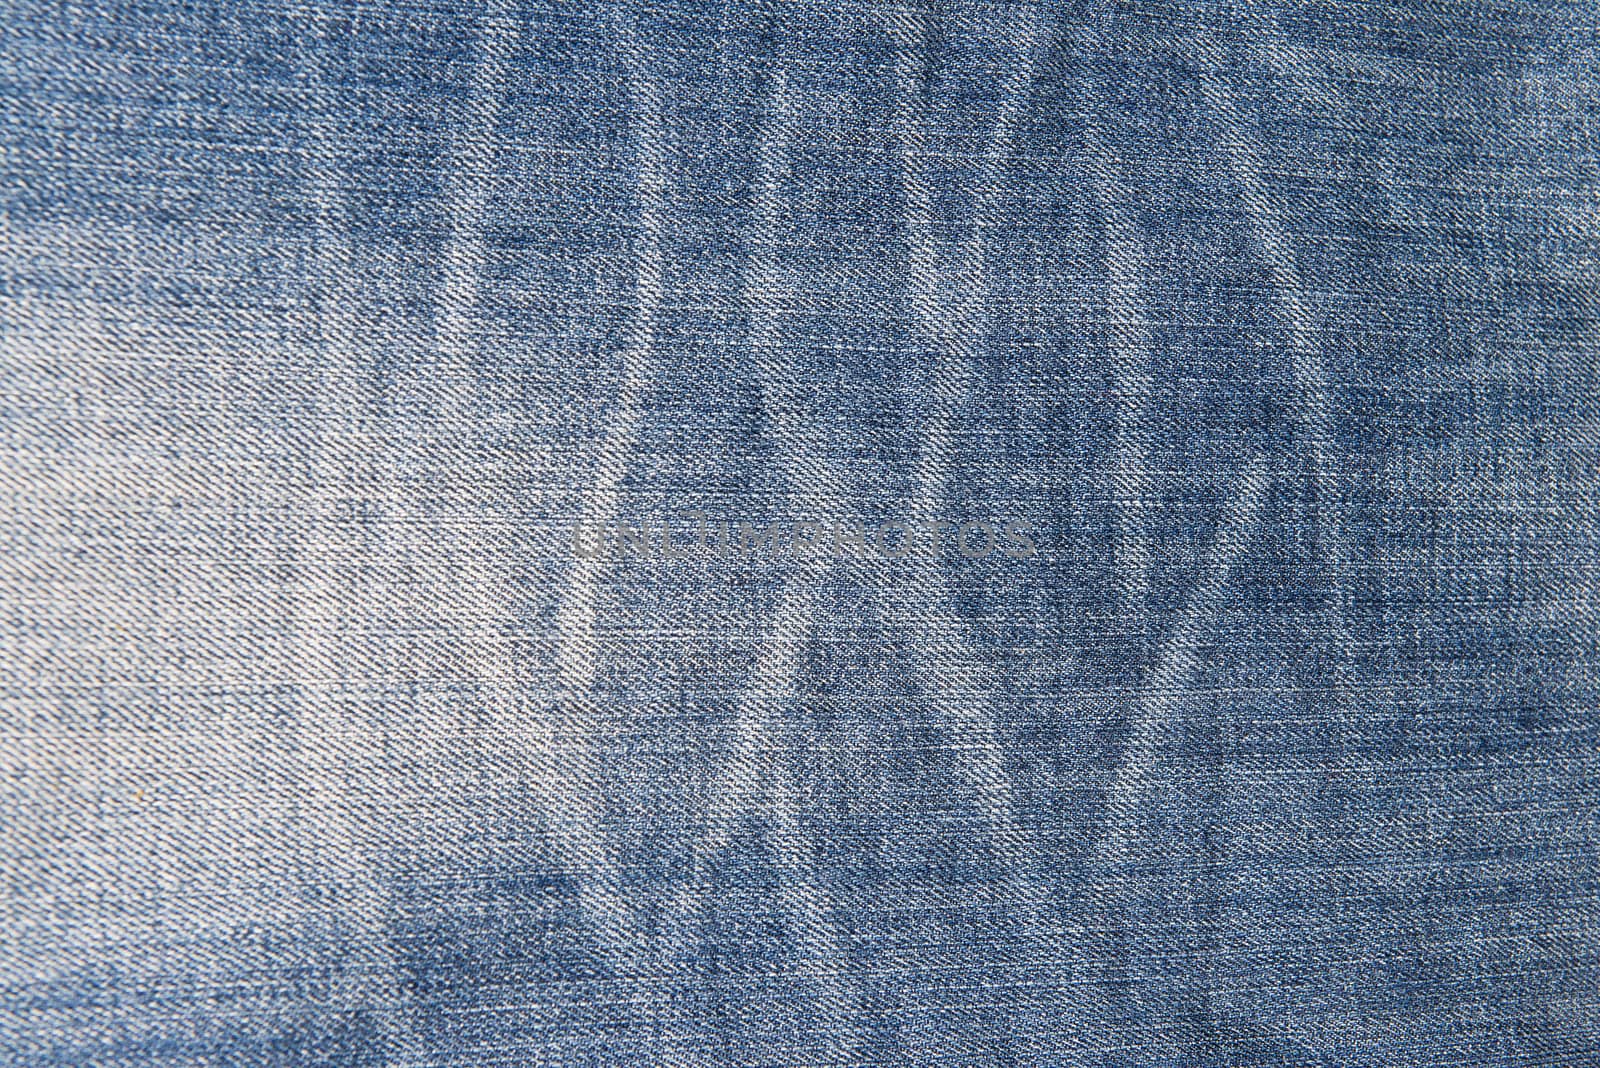 Old blue jeans pattern background by angelsimon